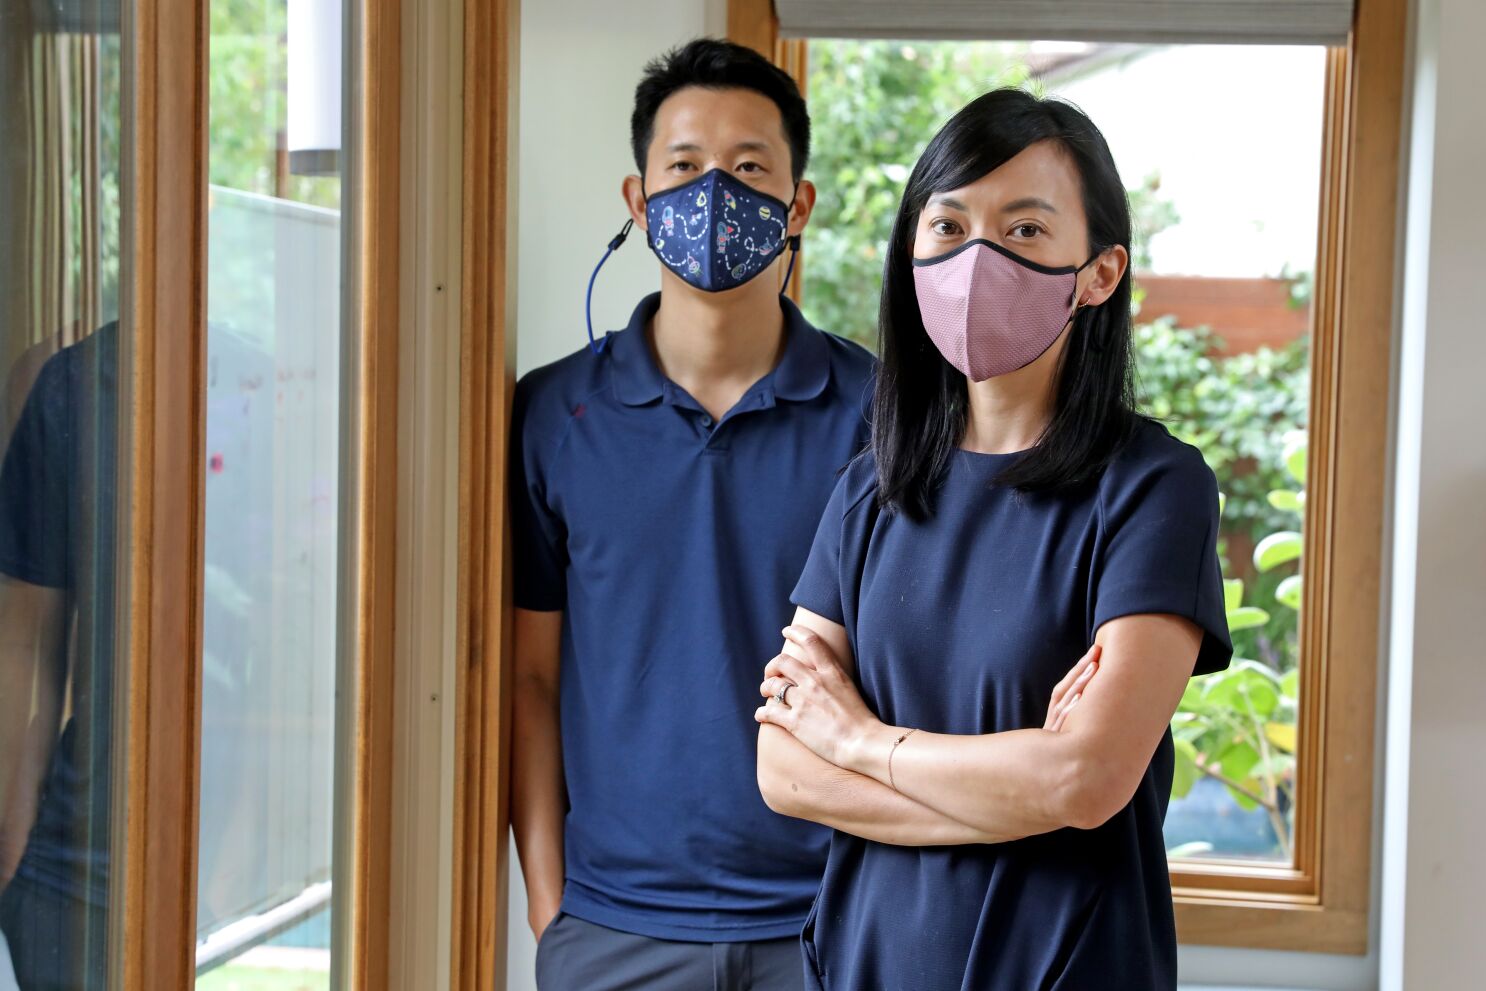 Happy Masks How a COVID face covering went viral - Los Angeles Times